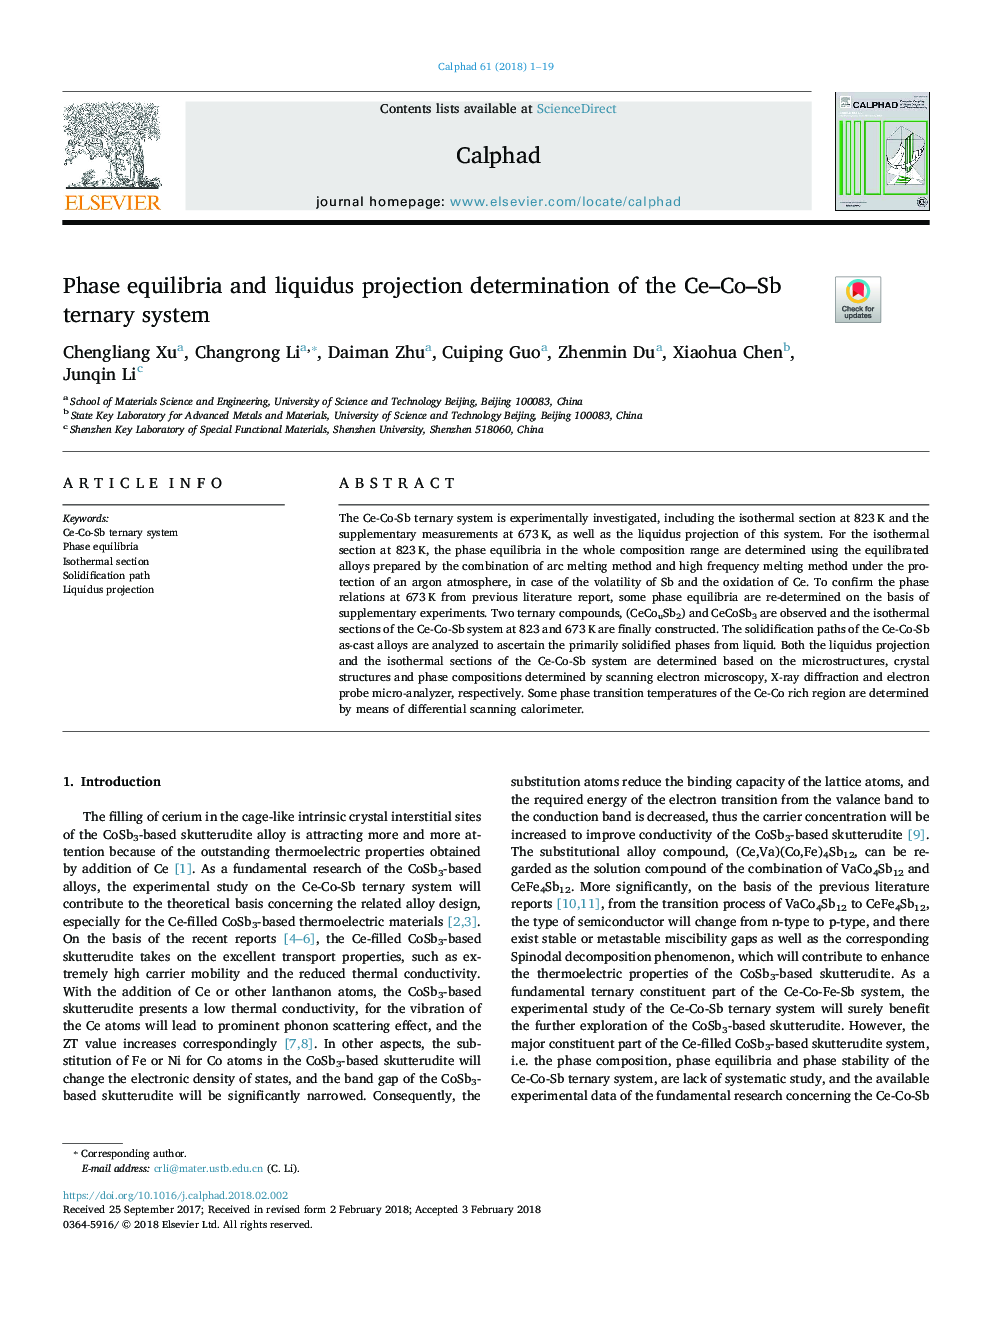 Phase equilibria and liquidus projection determination of the Ce-Co-Sb ternary system